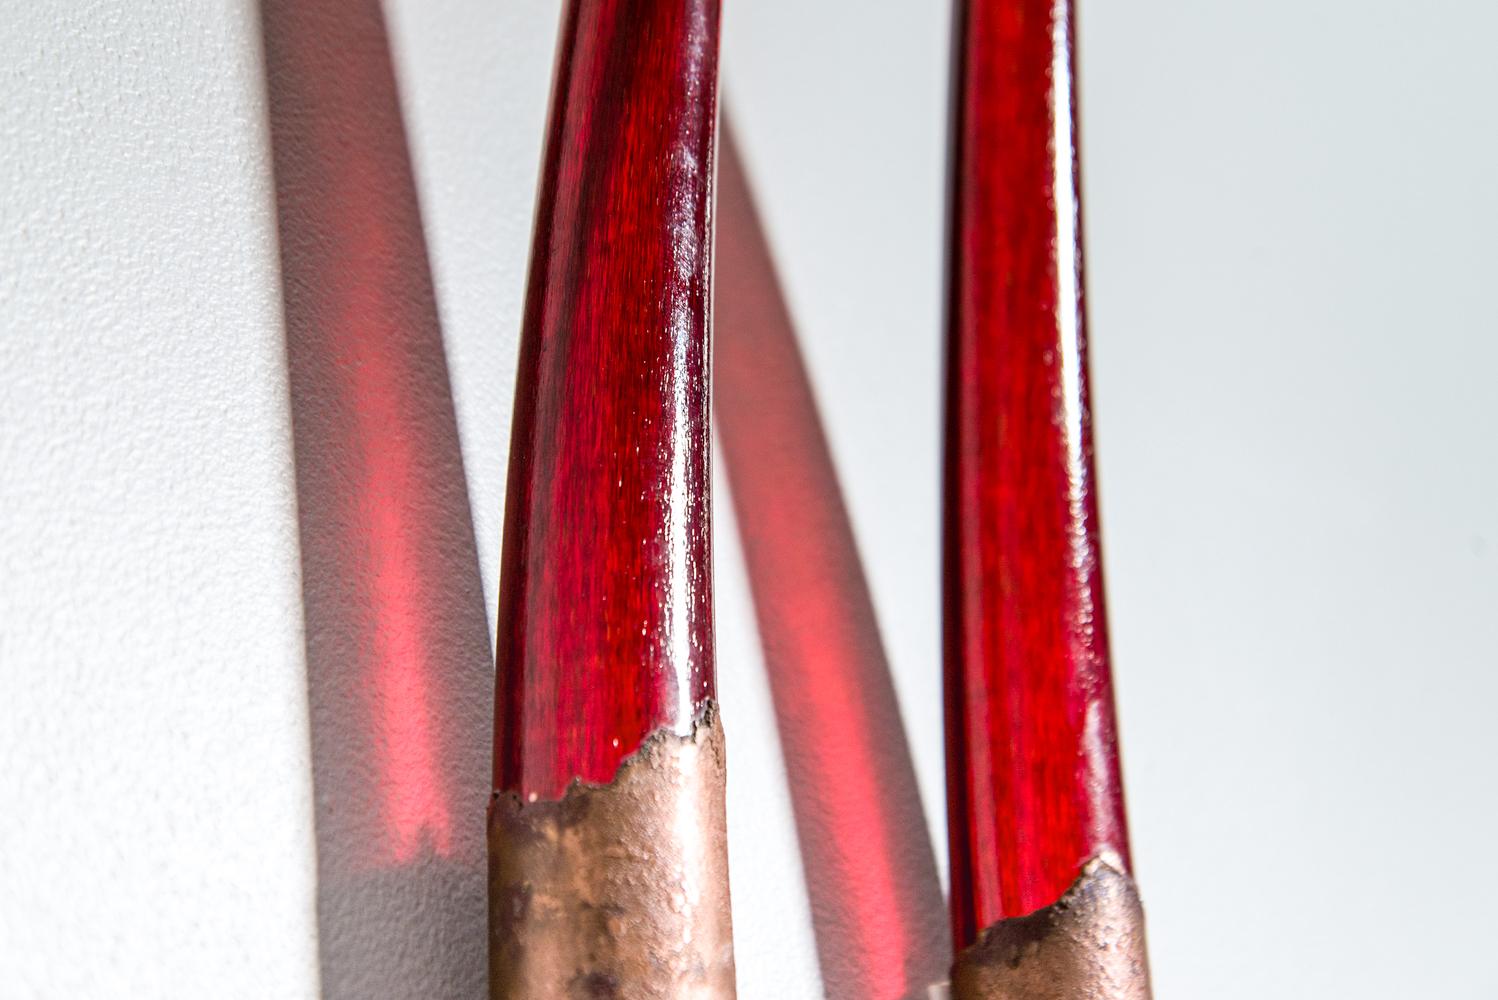 Metaphors of time, space, earth, and its elements are reflected in the elegant and glowing glass sculptures by Canadian artist John Paul Robinson. This large, stunning glass and metal piece in deep red mimics the mesmerizing flames of a fire. In